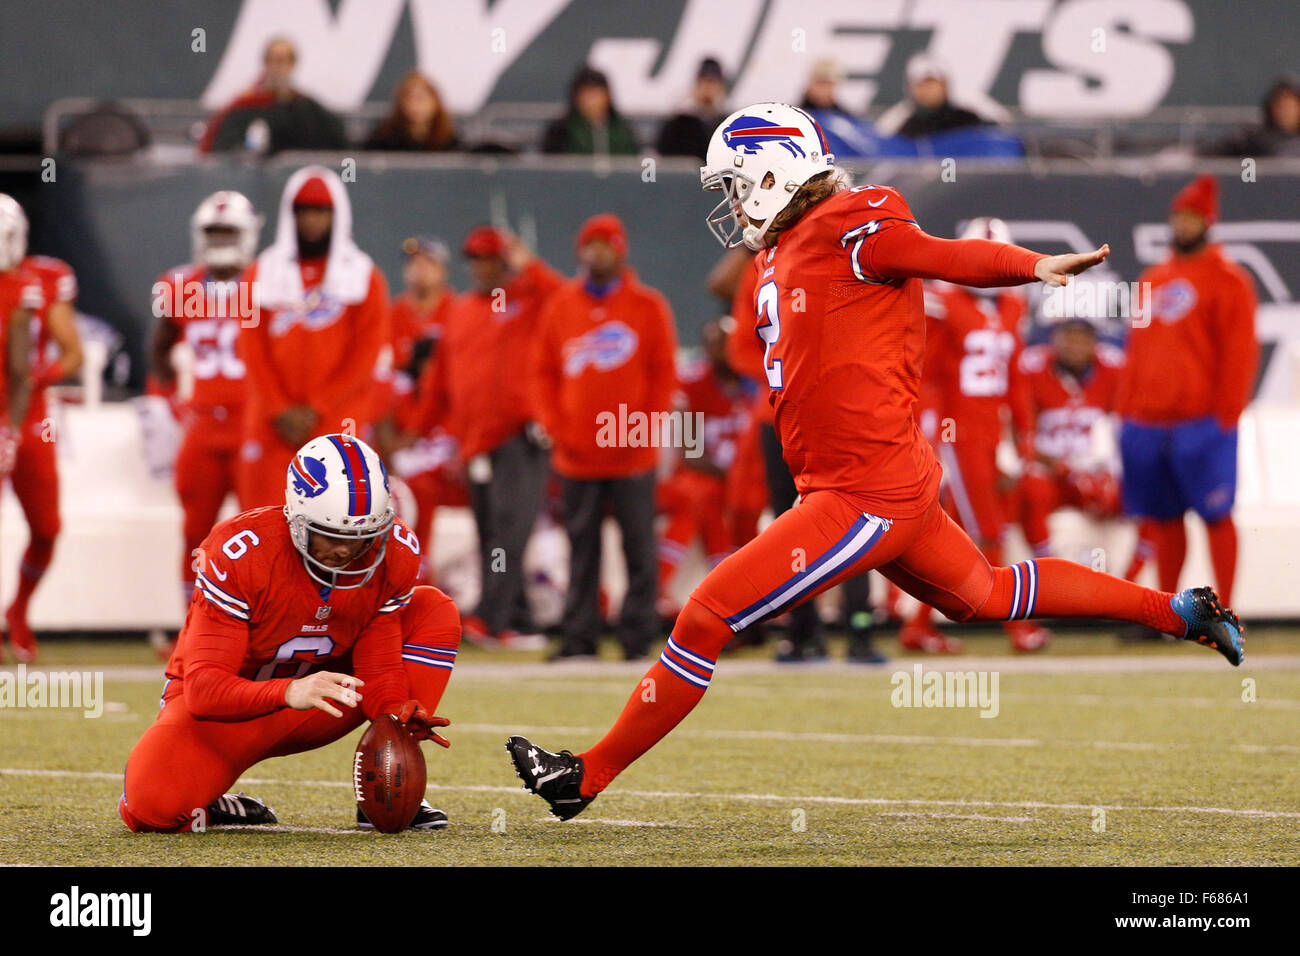 East Rutherford, New Jersey, USA. 12th Nov, 2015. Buffalo Bills kicker Dan Carpenter (2) kicks the field goal with punter Colton Schmidt (6) holding during the NFL game between the Buffalo Bills and the New York Jets at MetLife Stadium in East Rutherford, New Jersey. The Buffalo Bills won 22-17. Christopher Szagola/CSM/Alamy Live News Stock Photo